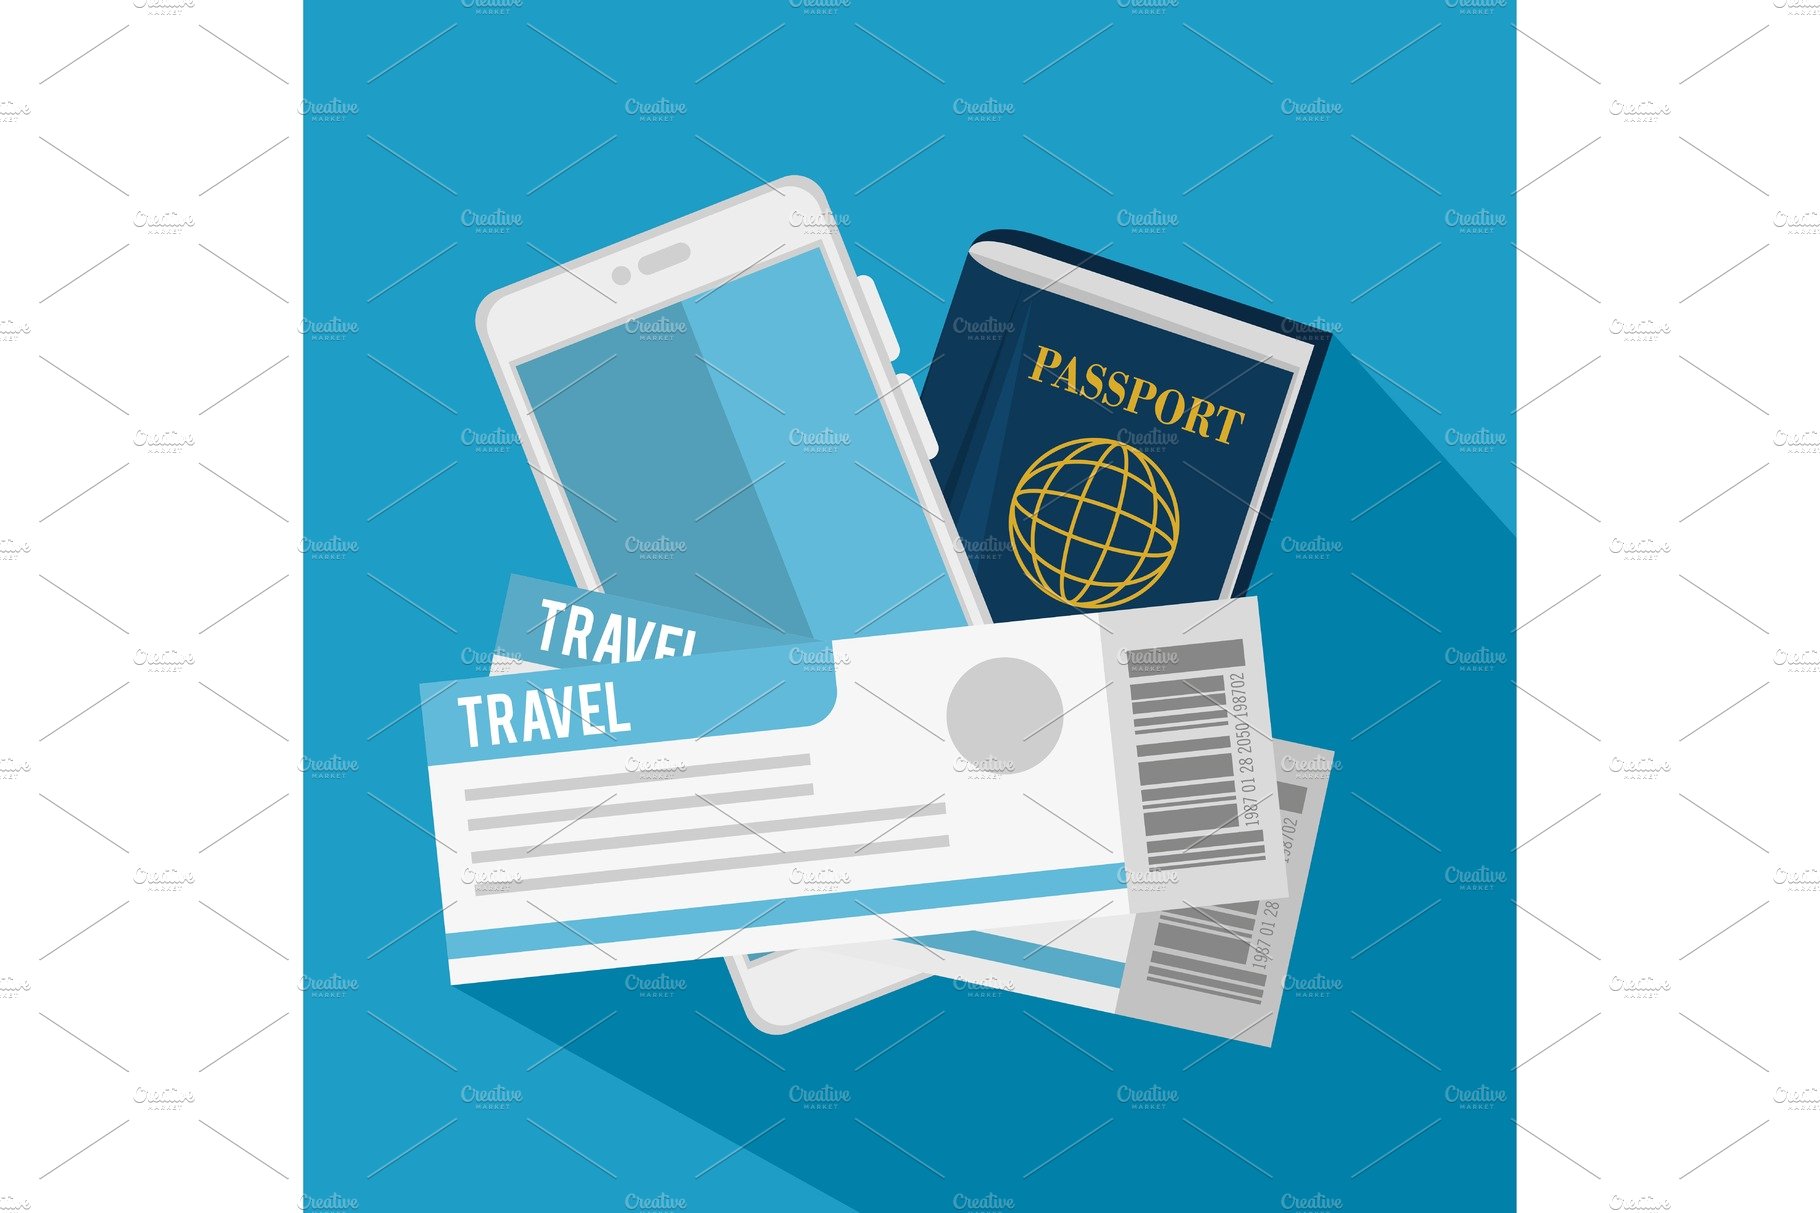 passport and flight tickets cover image.